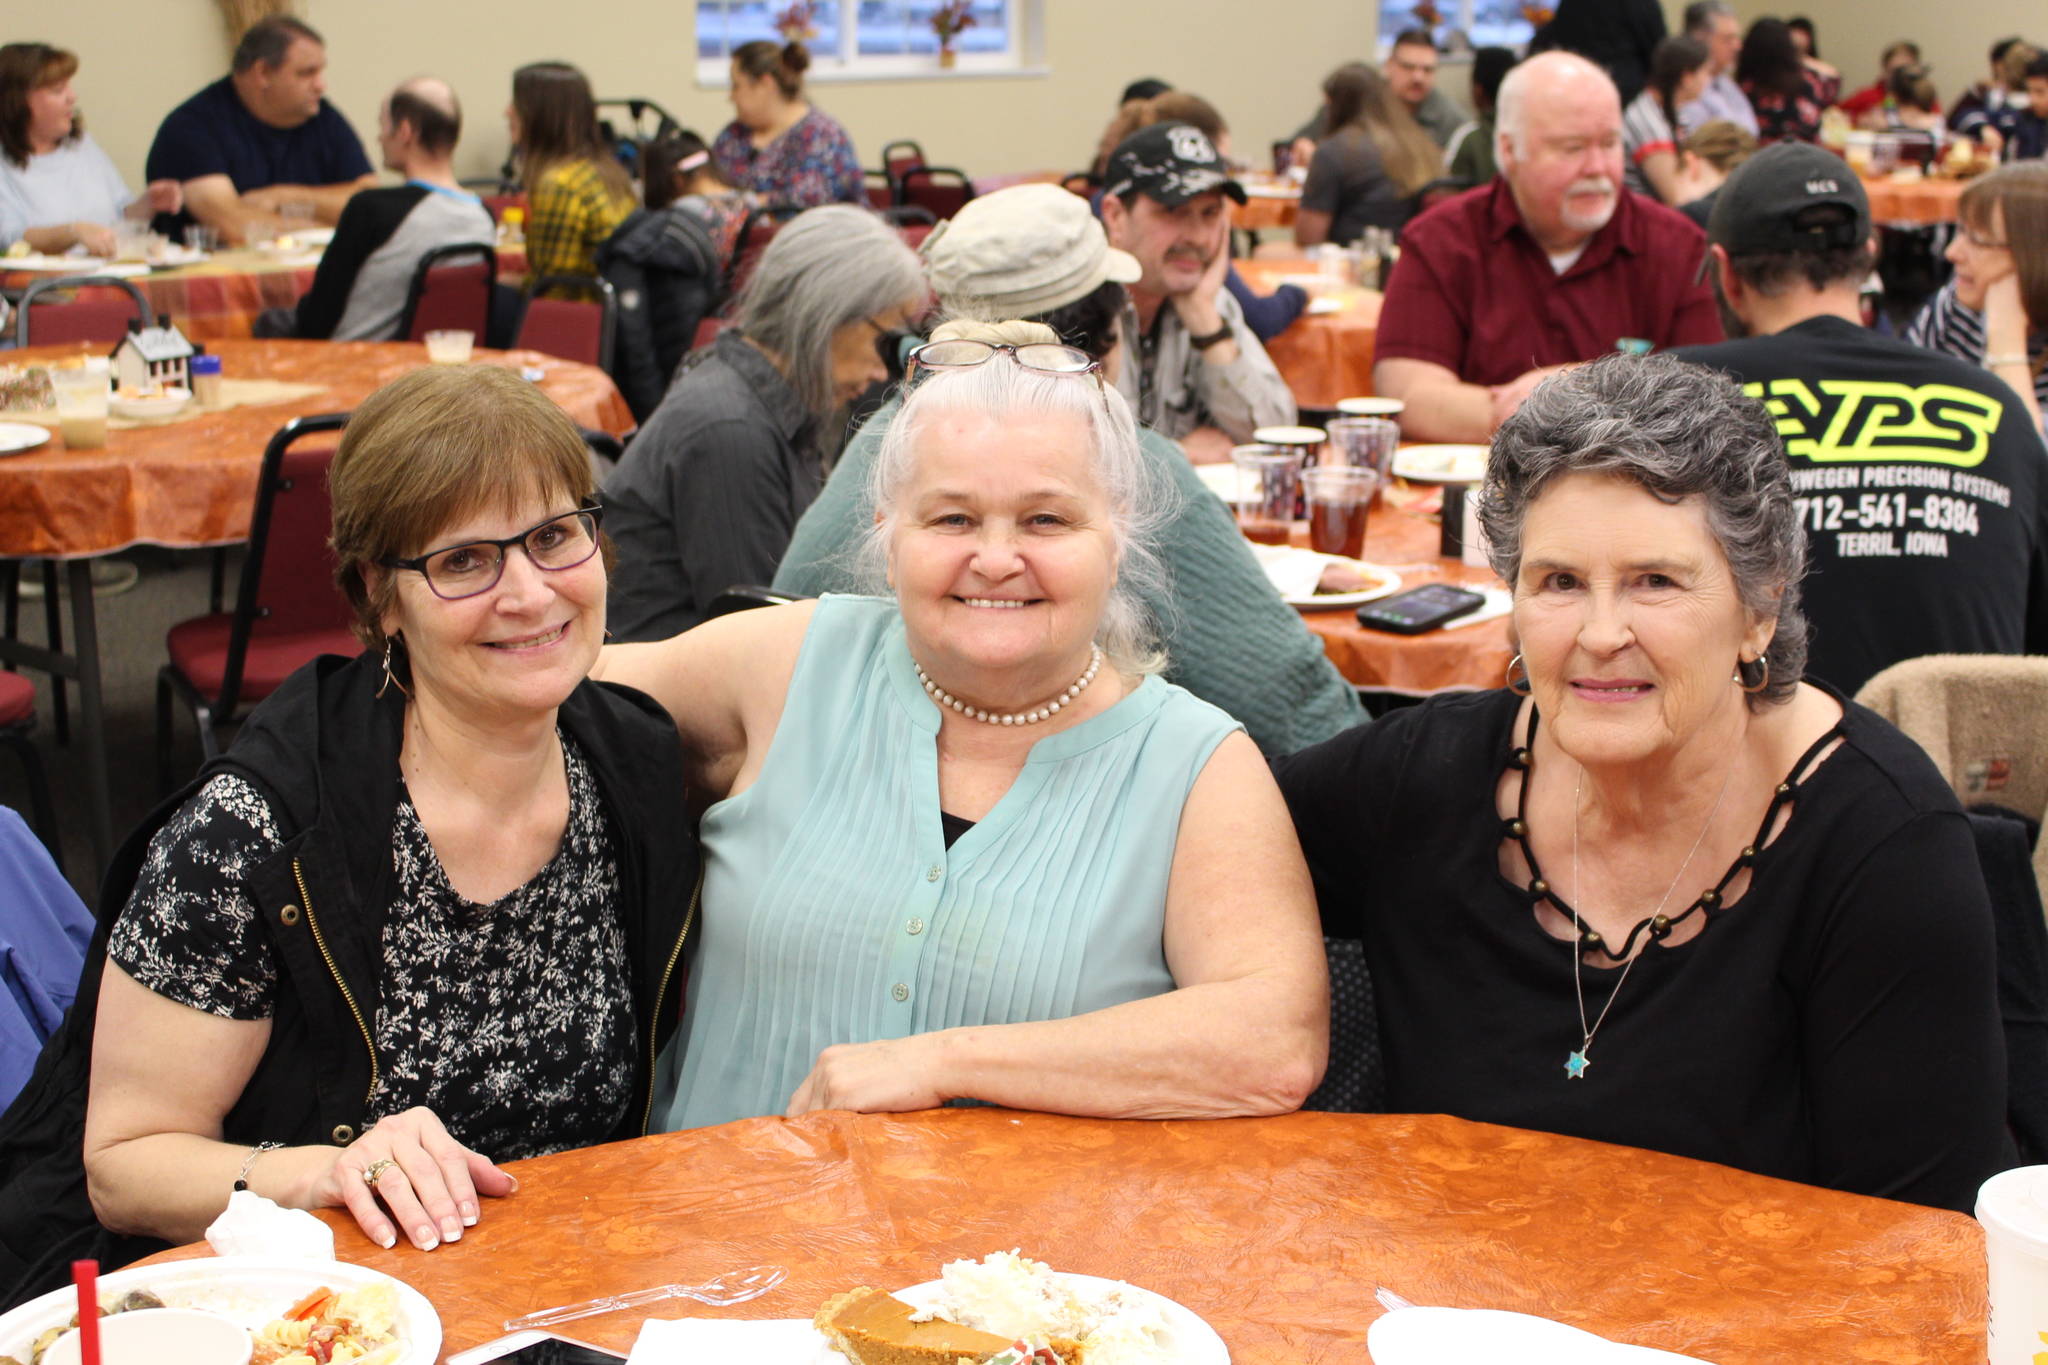 From left, Diane Somers, Cindy Todd and Barbara Cooper smile for the camera during the Thanksgiving community potluck at College Heights Baptist Church in Soldotna, Alaska, on Thursday, Nov. 28, 2019. (Photo by Brian Mazurek/Peninsula Clarion)